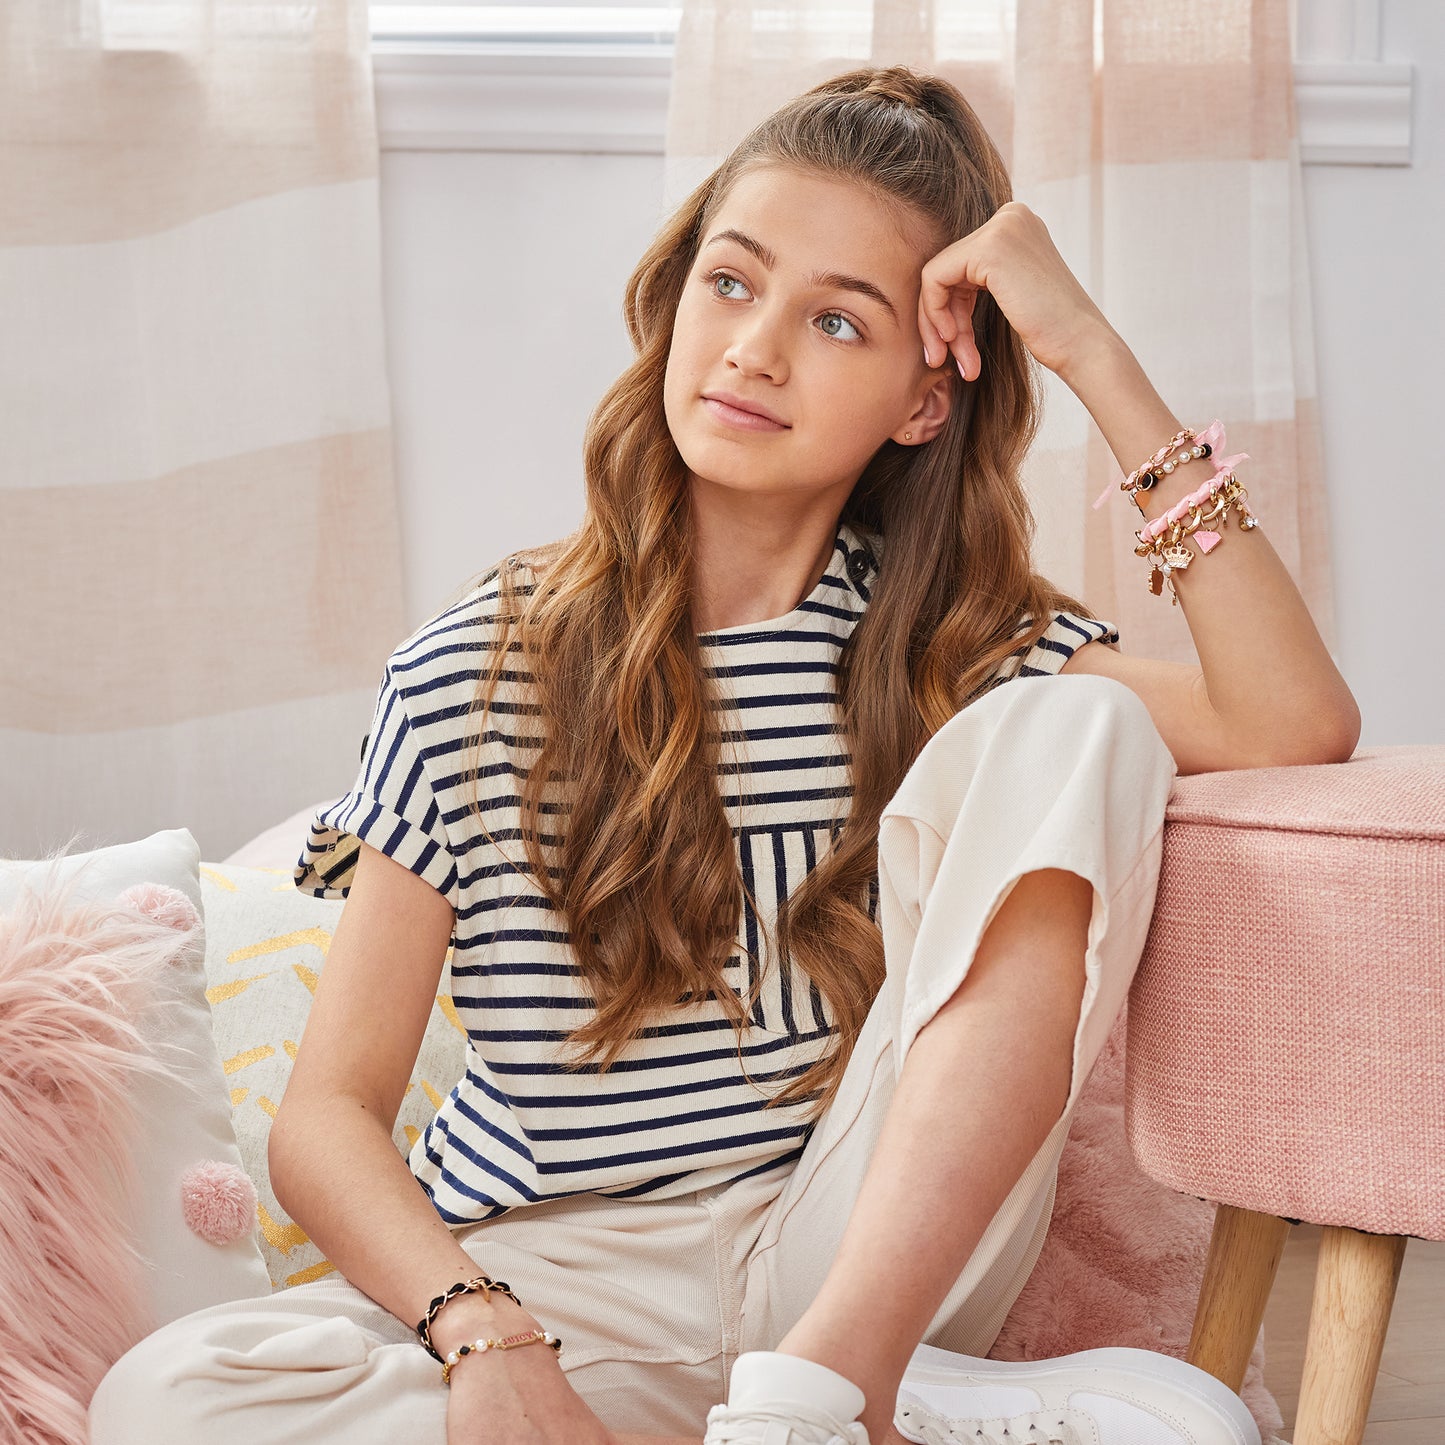 Mini Juicy Couture™ Chains & Charms